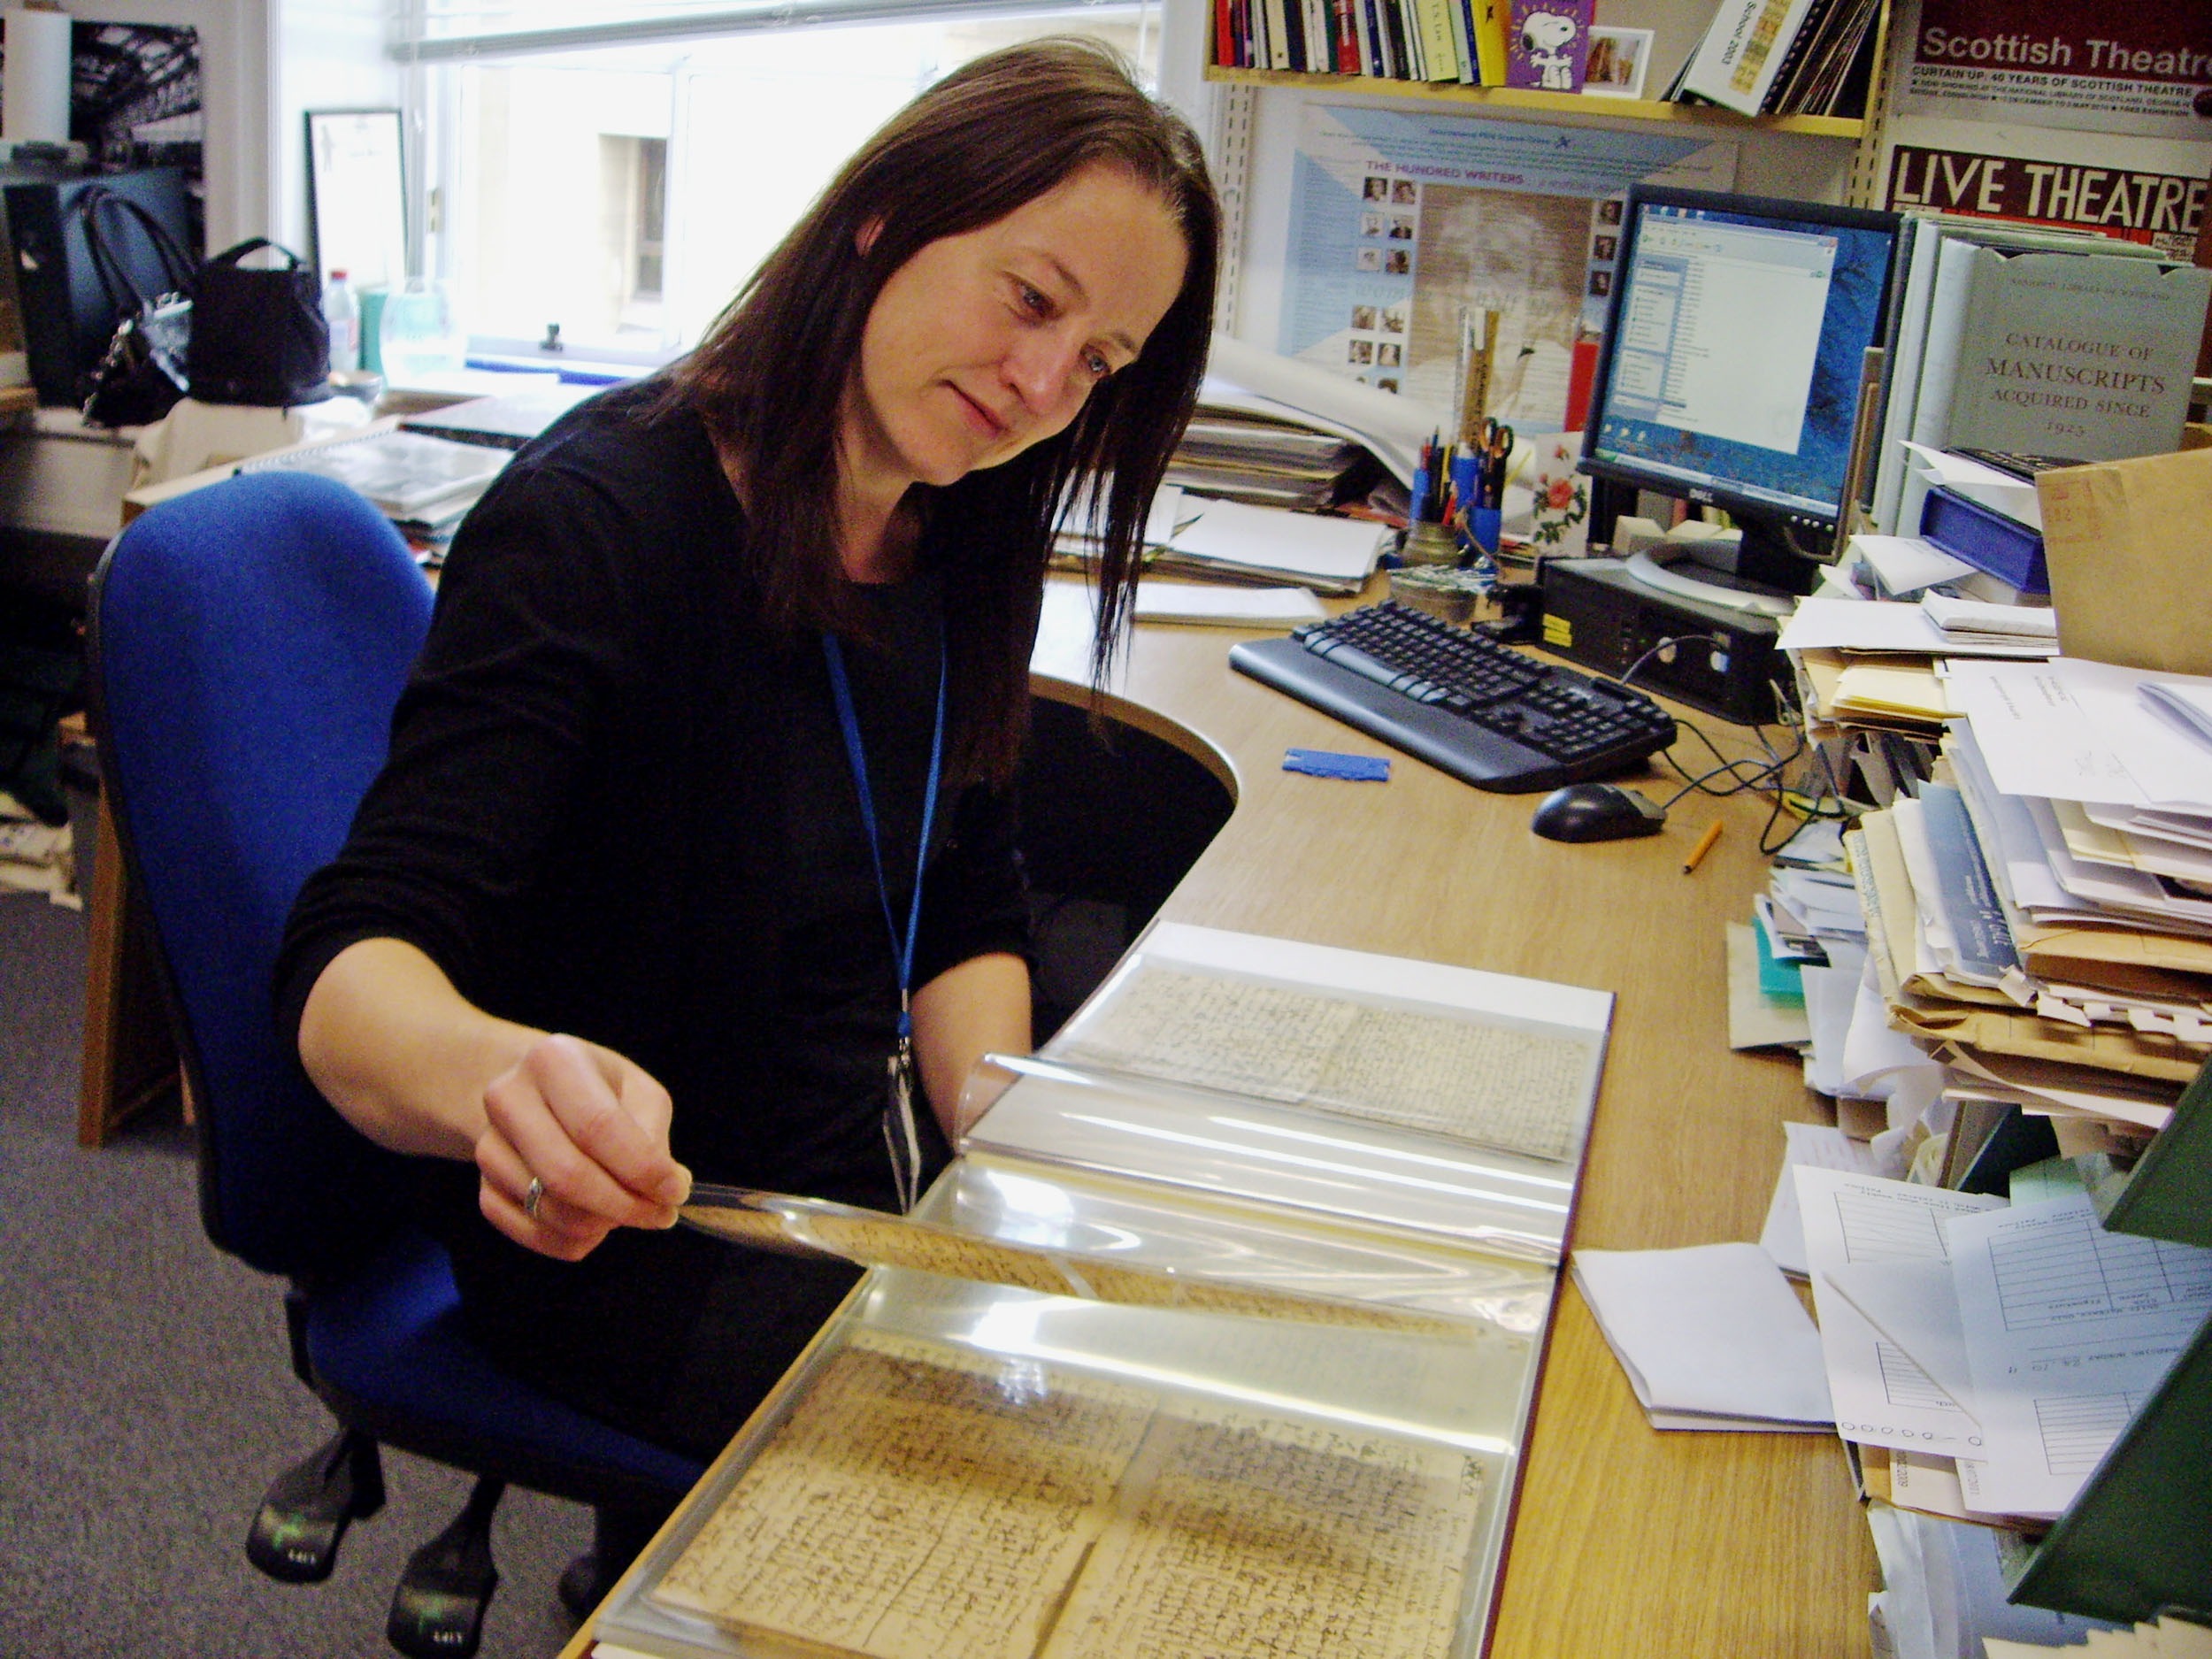 Alison Metcalfe looks over the pages of the 1870 and 1871 Field Diaries held by the National Library of Scotland, Edinburgh, 2011. Copyright Livingstone Spectral Imaging Project team. Creative Commons Attribution-NonCommercial 3.0 Unported (https://creativecommons.org/licenses/by-nc/3.0/).